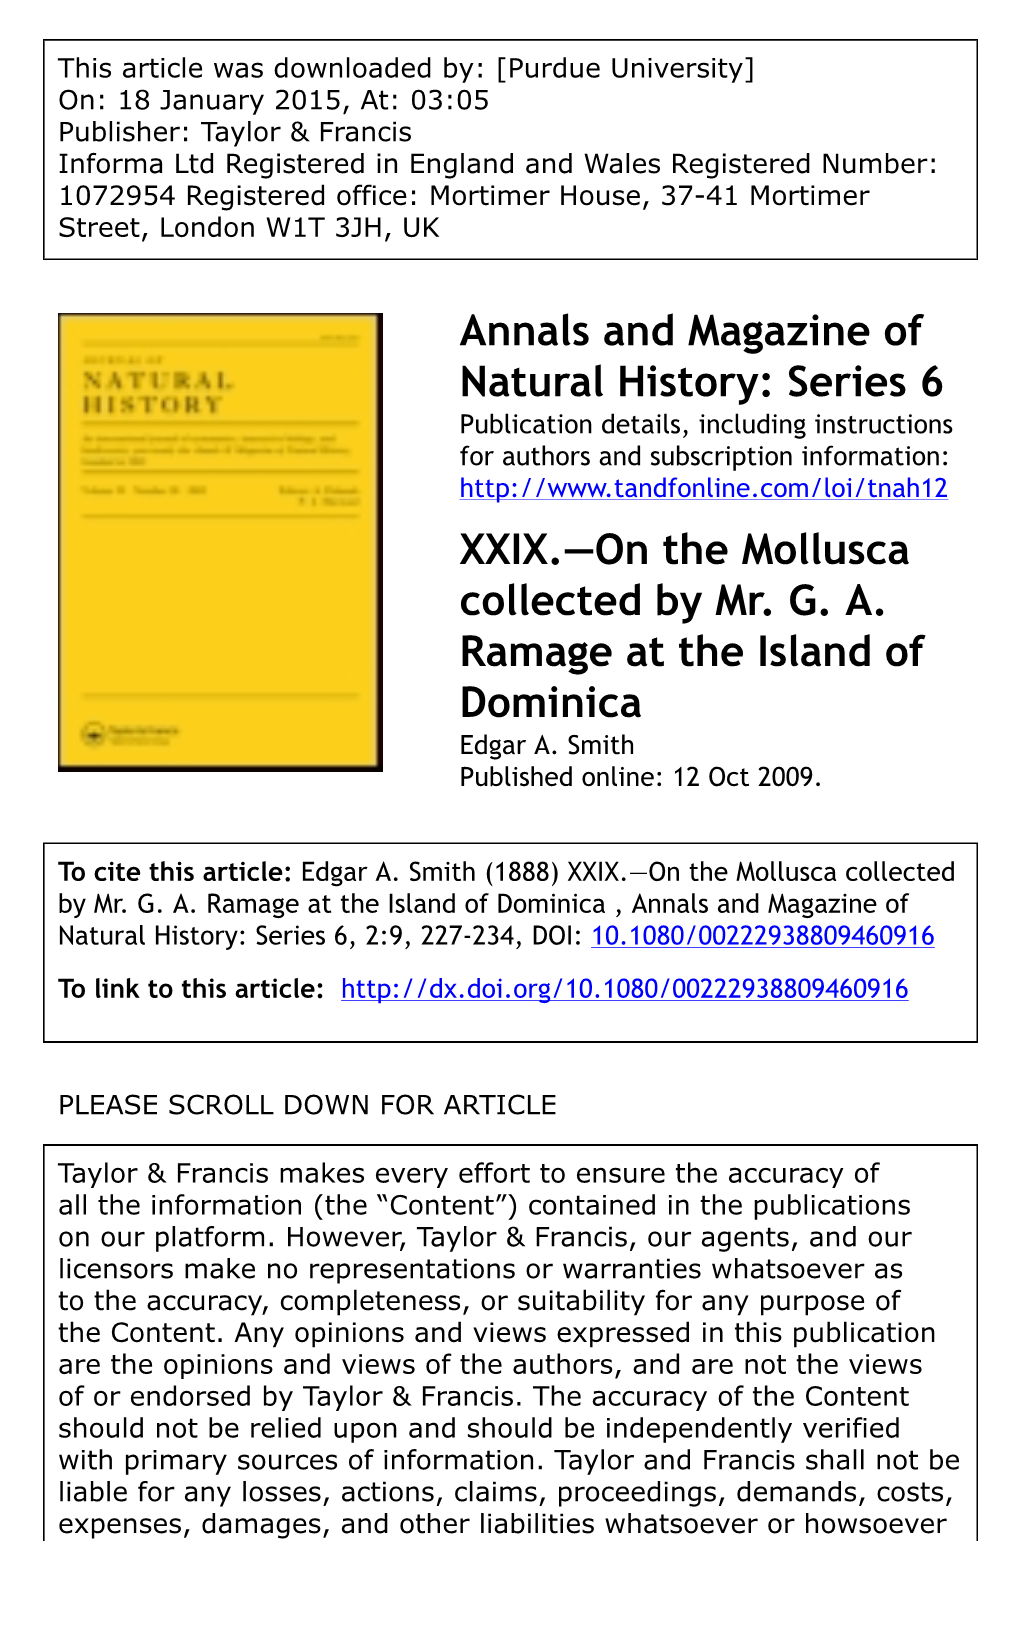 Annals and Magazine of Natural History: Series 6 XXIX